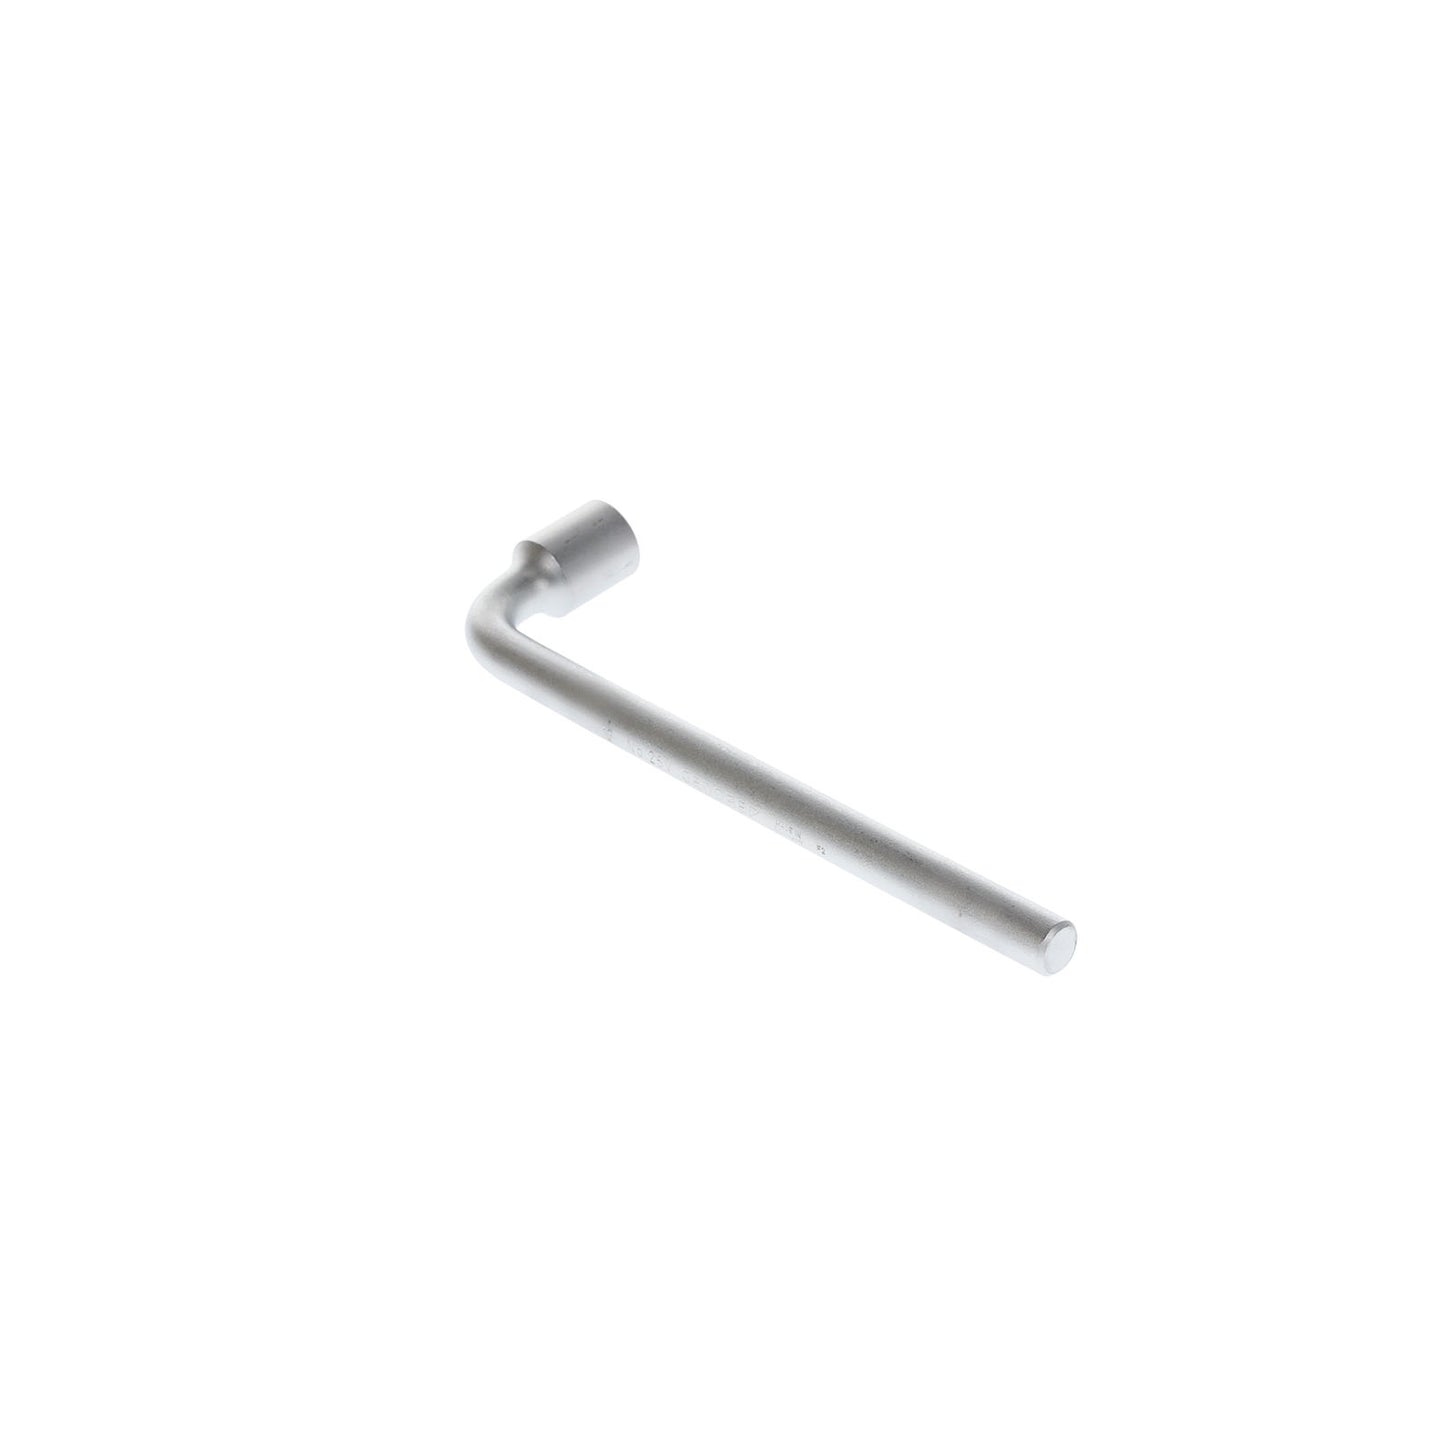 GEDORE 25 V 17 - Square Profile Wrench, 17mm (6195580)